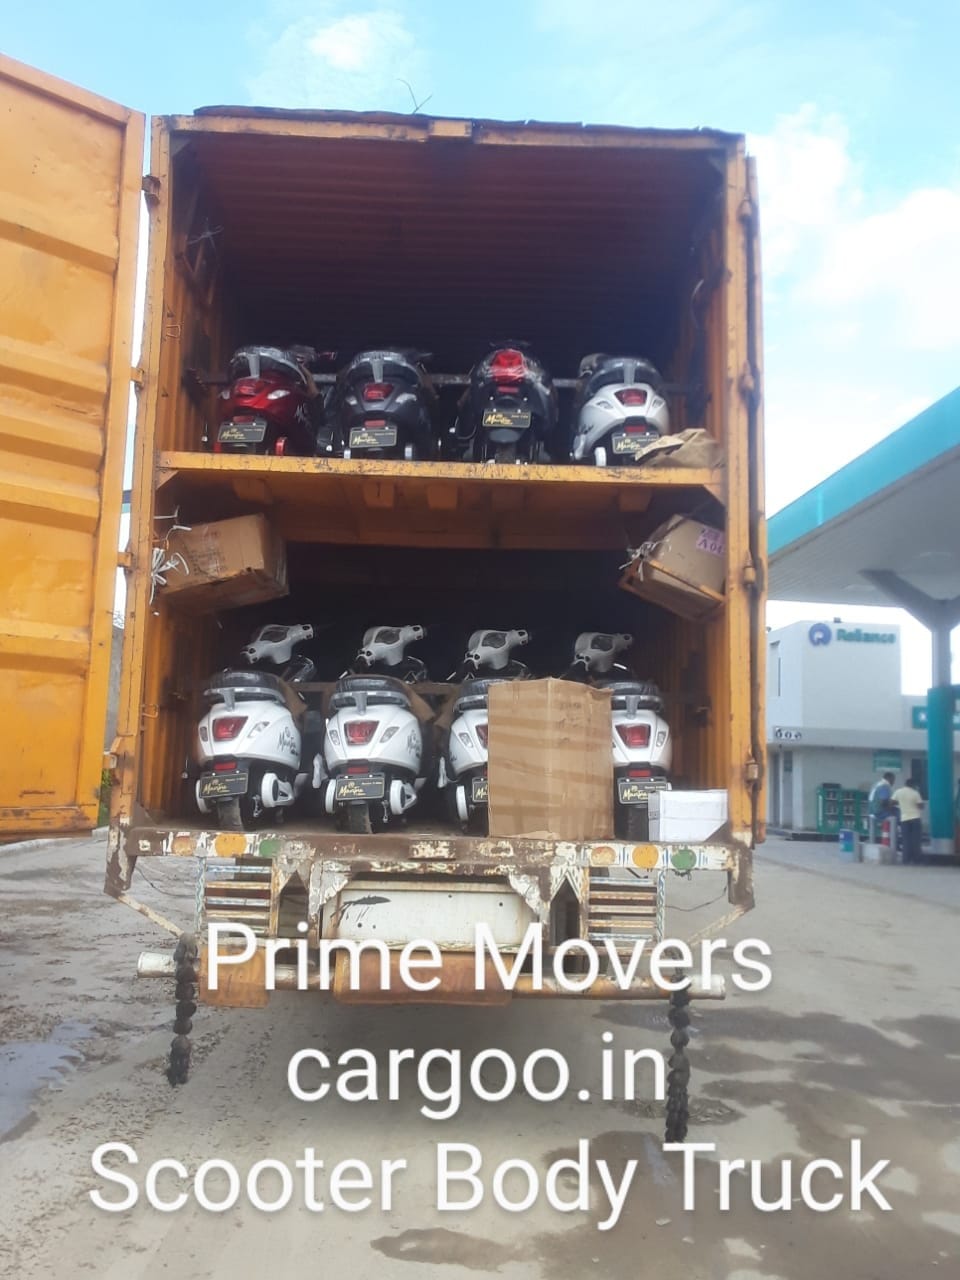 Local Packers and Movers Mumbai to Hyderabad 24x7x365 days available for home shifting with office relocation services 2